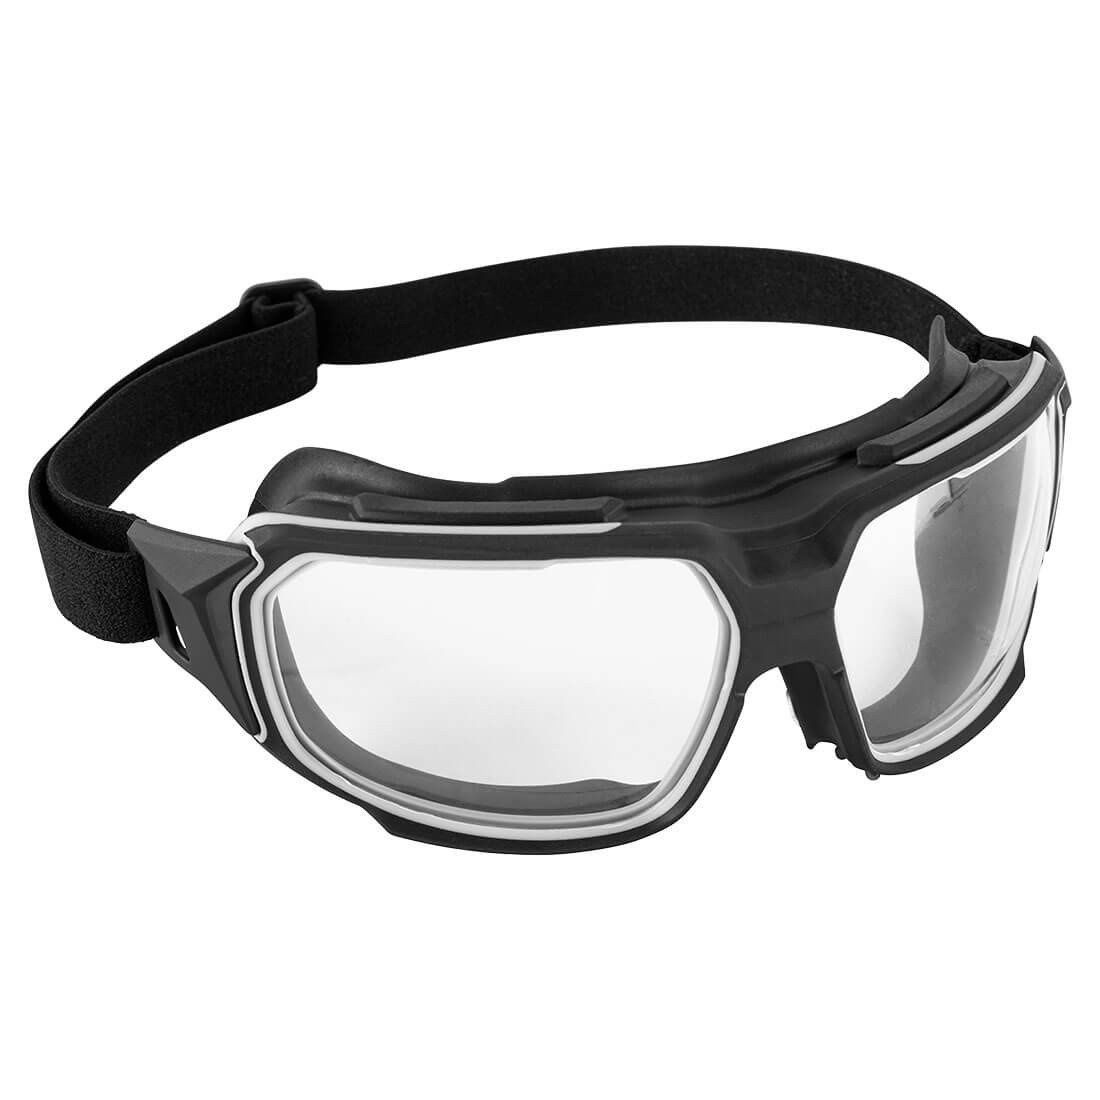 Foldable Goggles - Personal protection